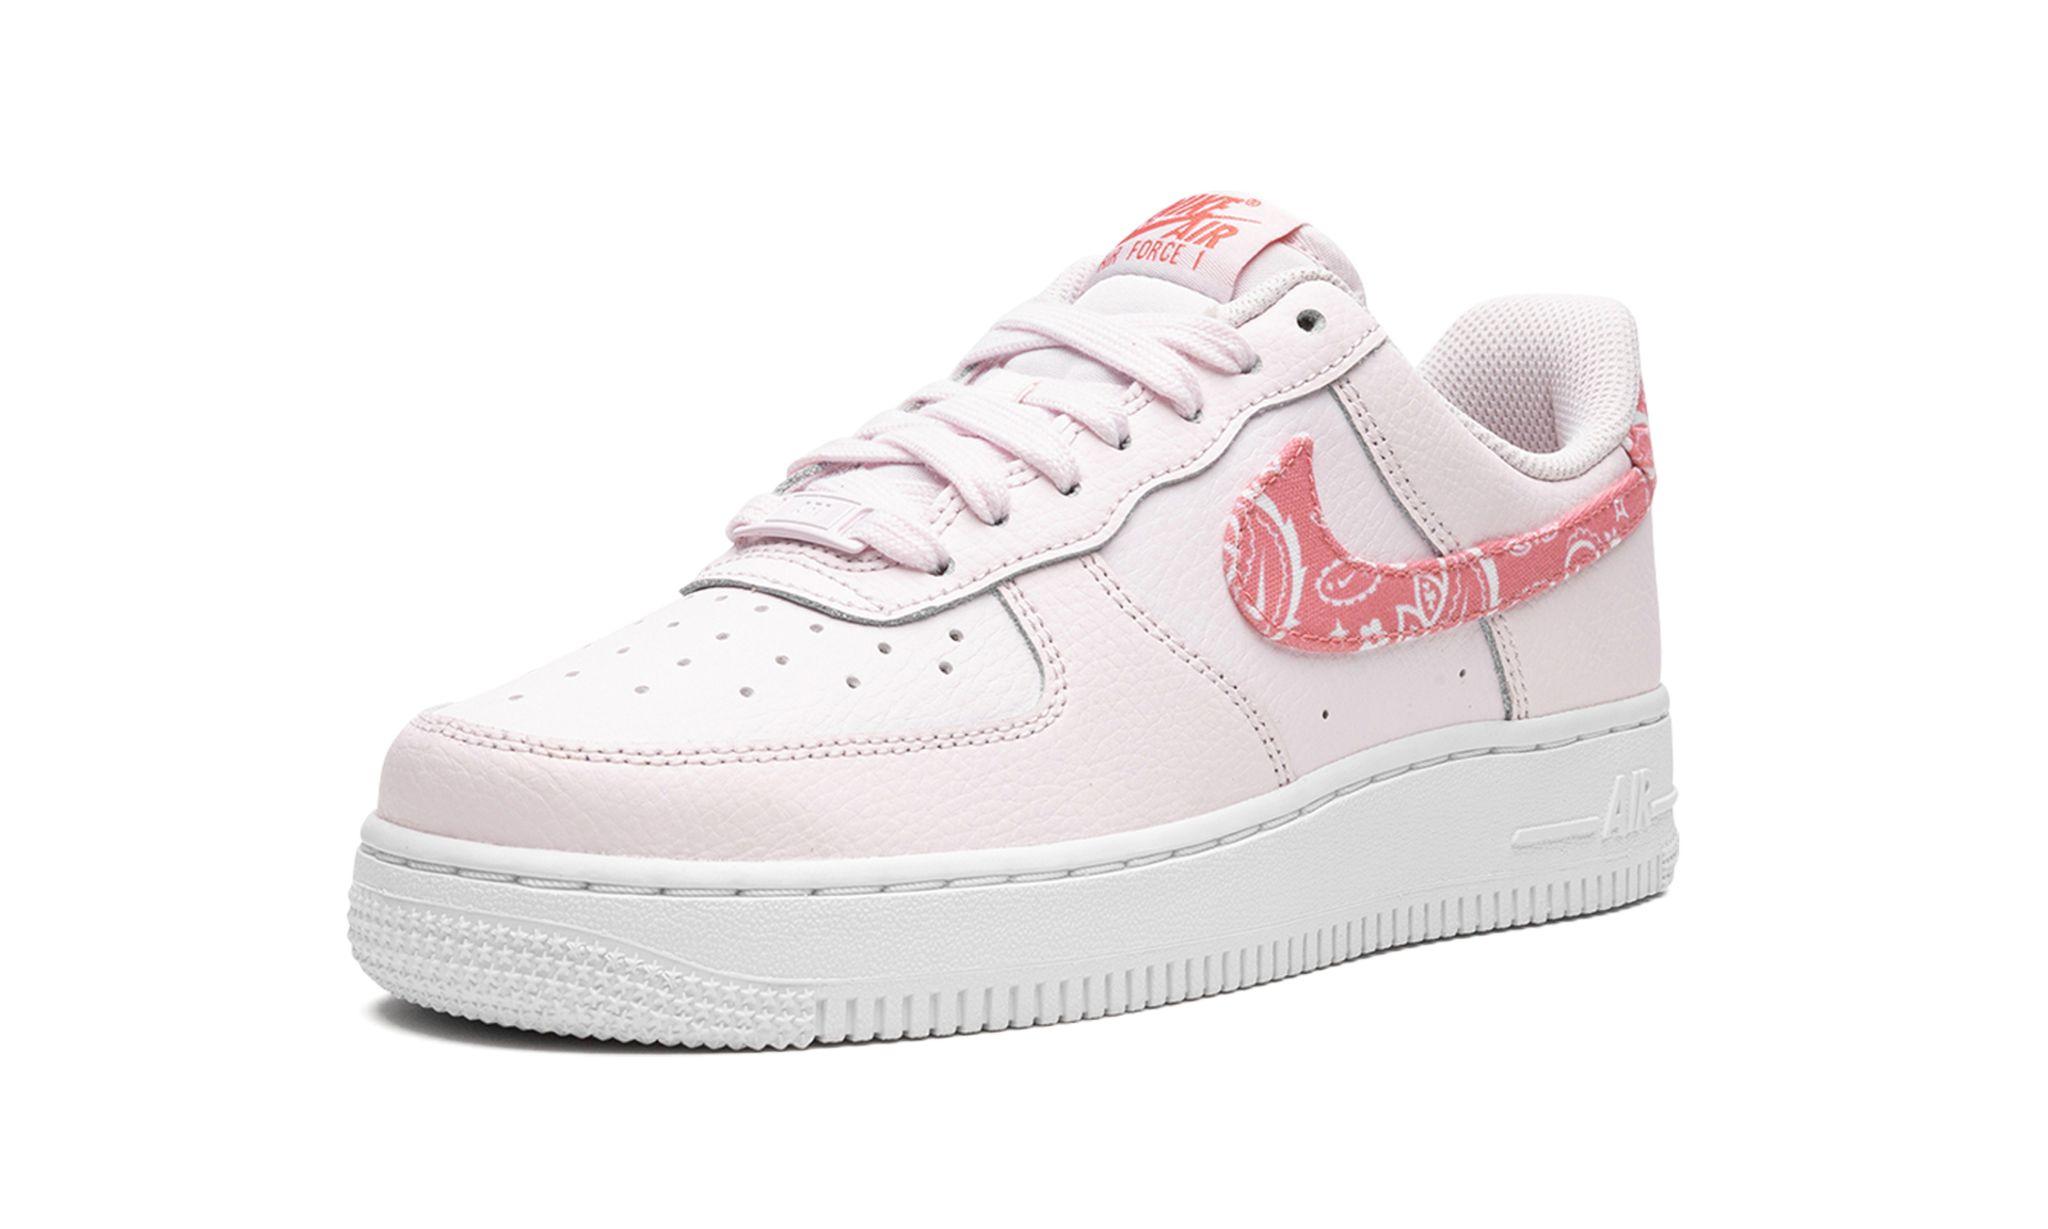 Nike Air Force 1 '07 "paisley Pack Pink" Shoes in Black | Lyst UK